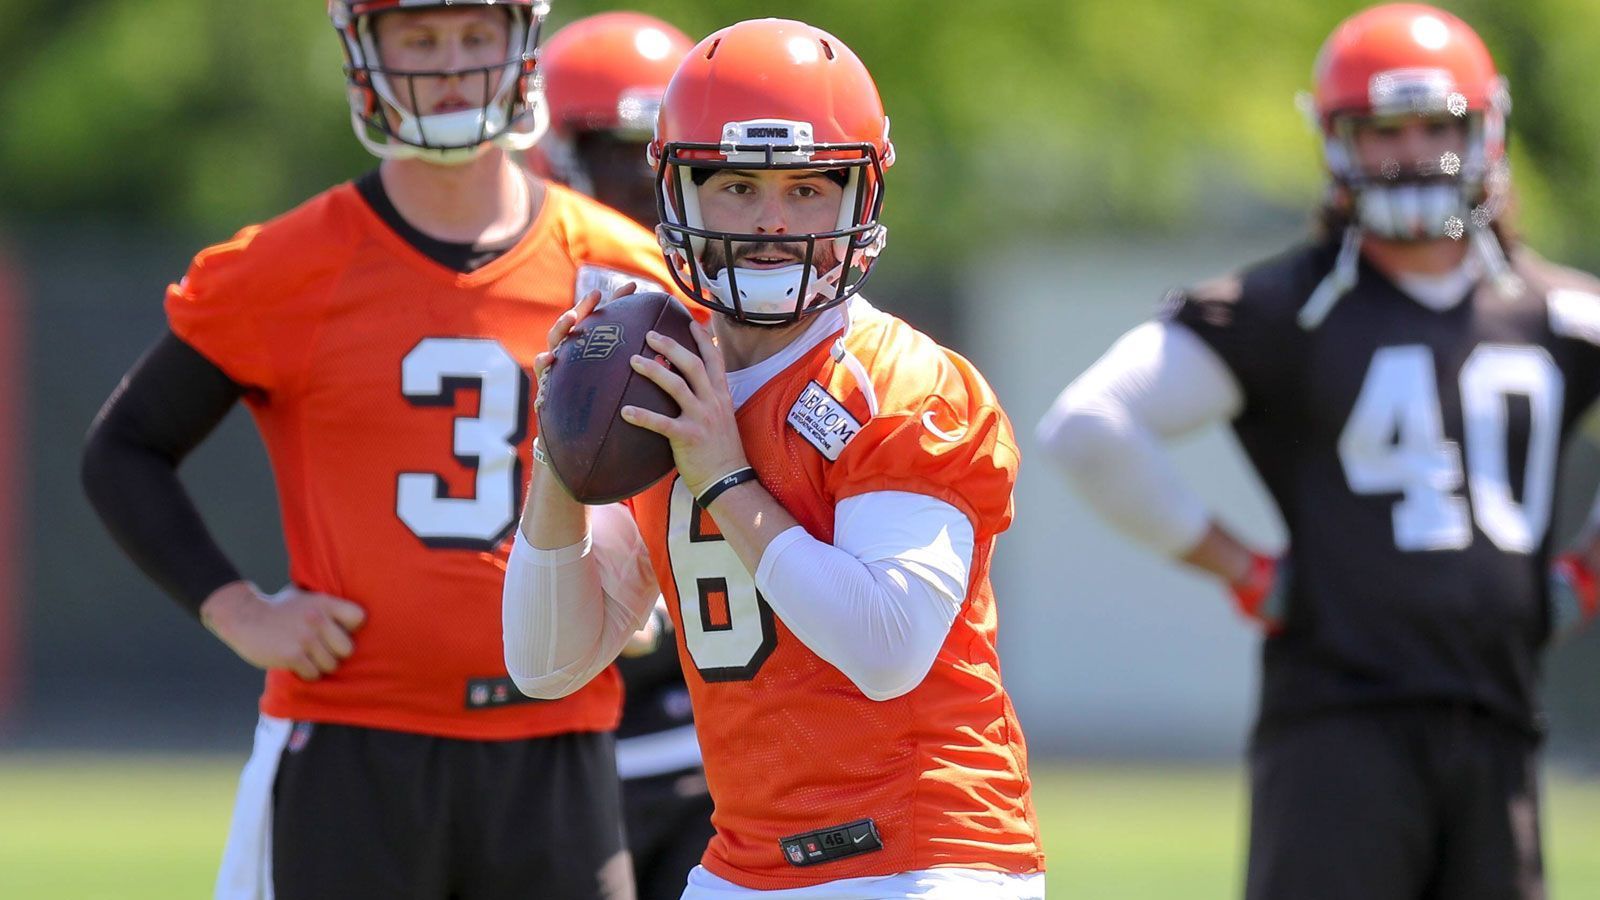 
                <strong>Die Top 5 Rookies in Madden 19</strong><br>
                Platz 3: Baker Mayfield, Quarterback, Cleveland Browns: 81
              